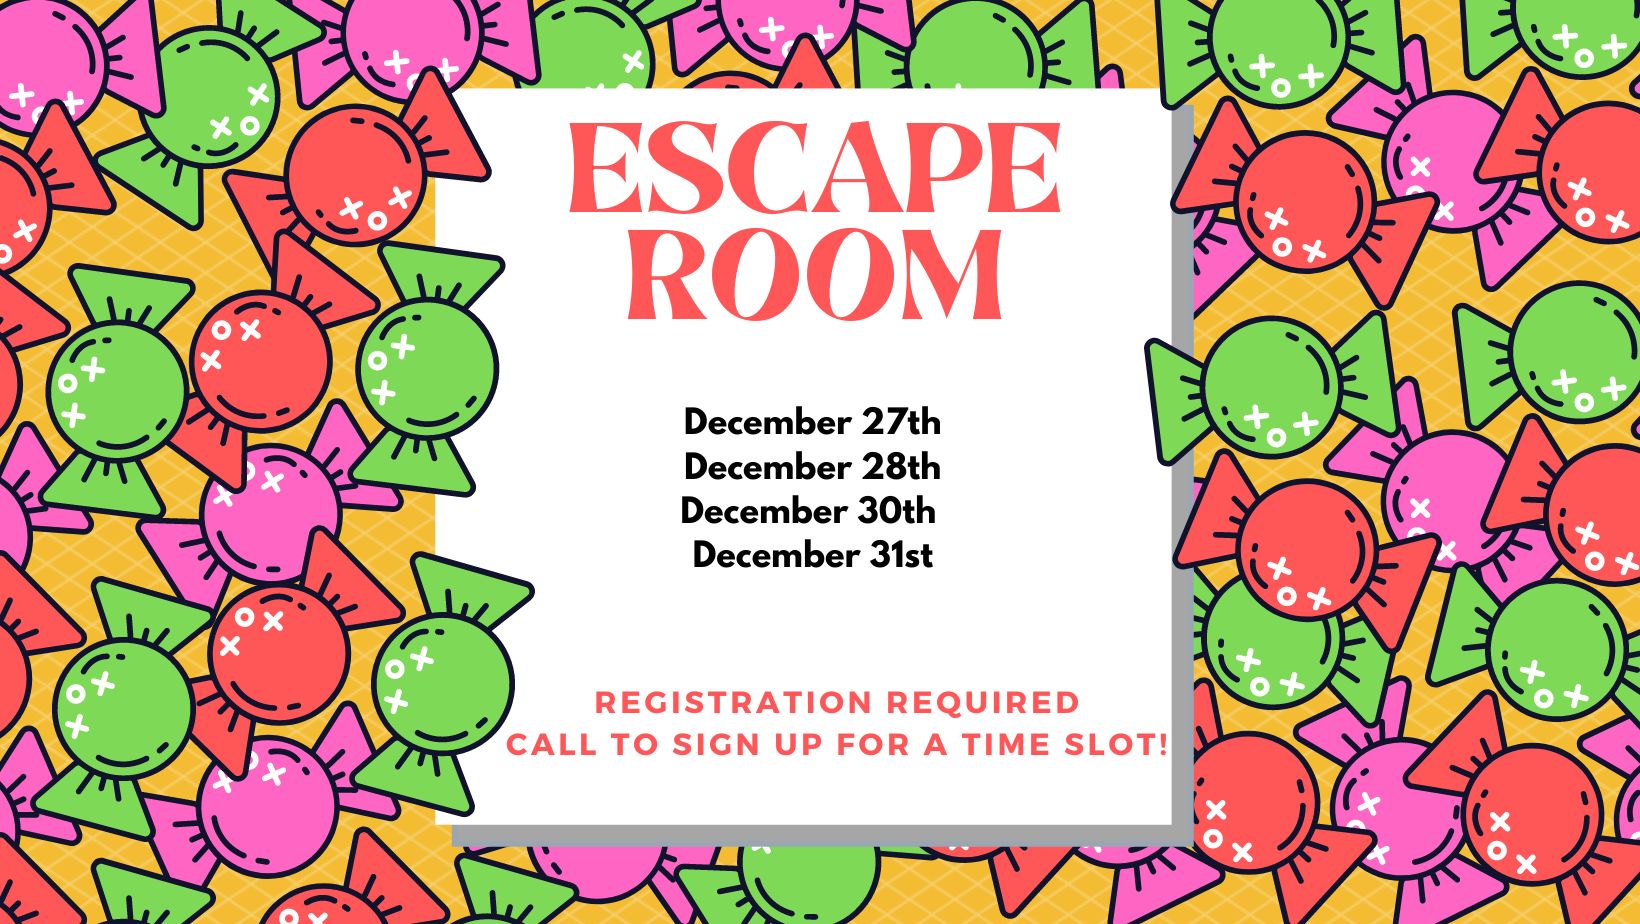 Escape Room in red font, surrounded by pink and green candies